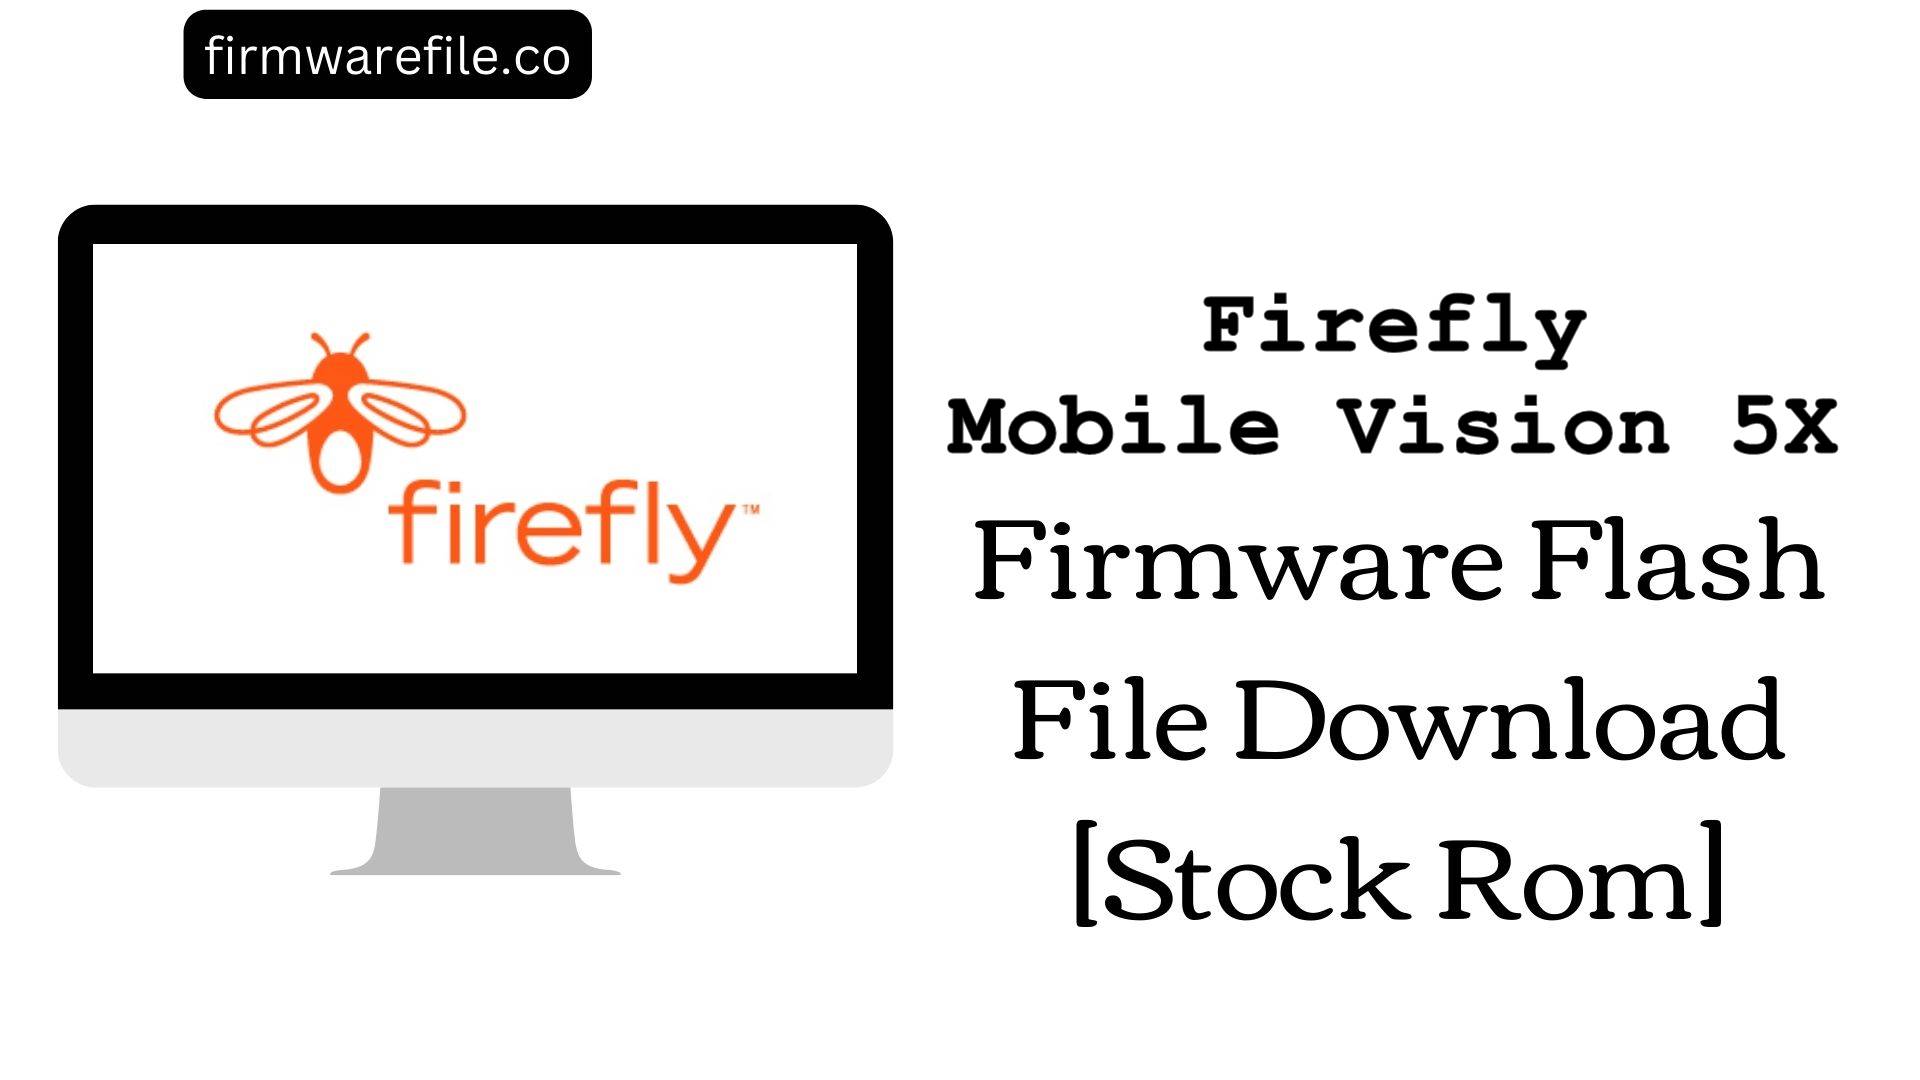 Firefly Mobile Vision 5X